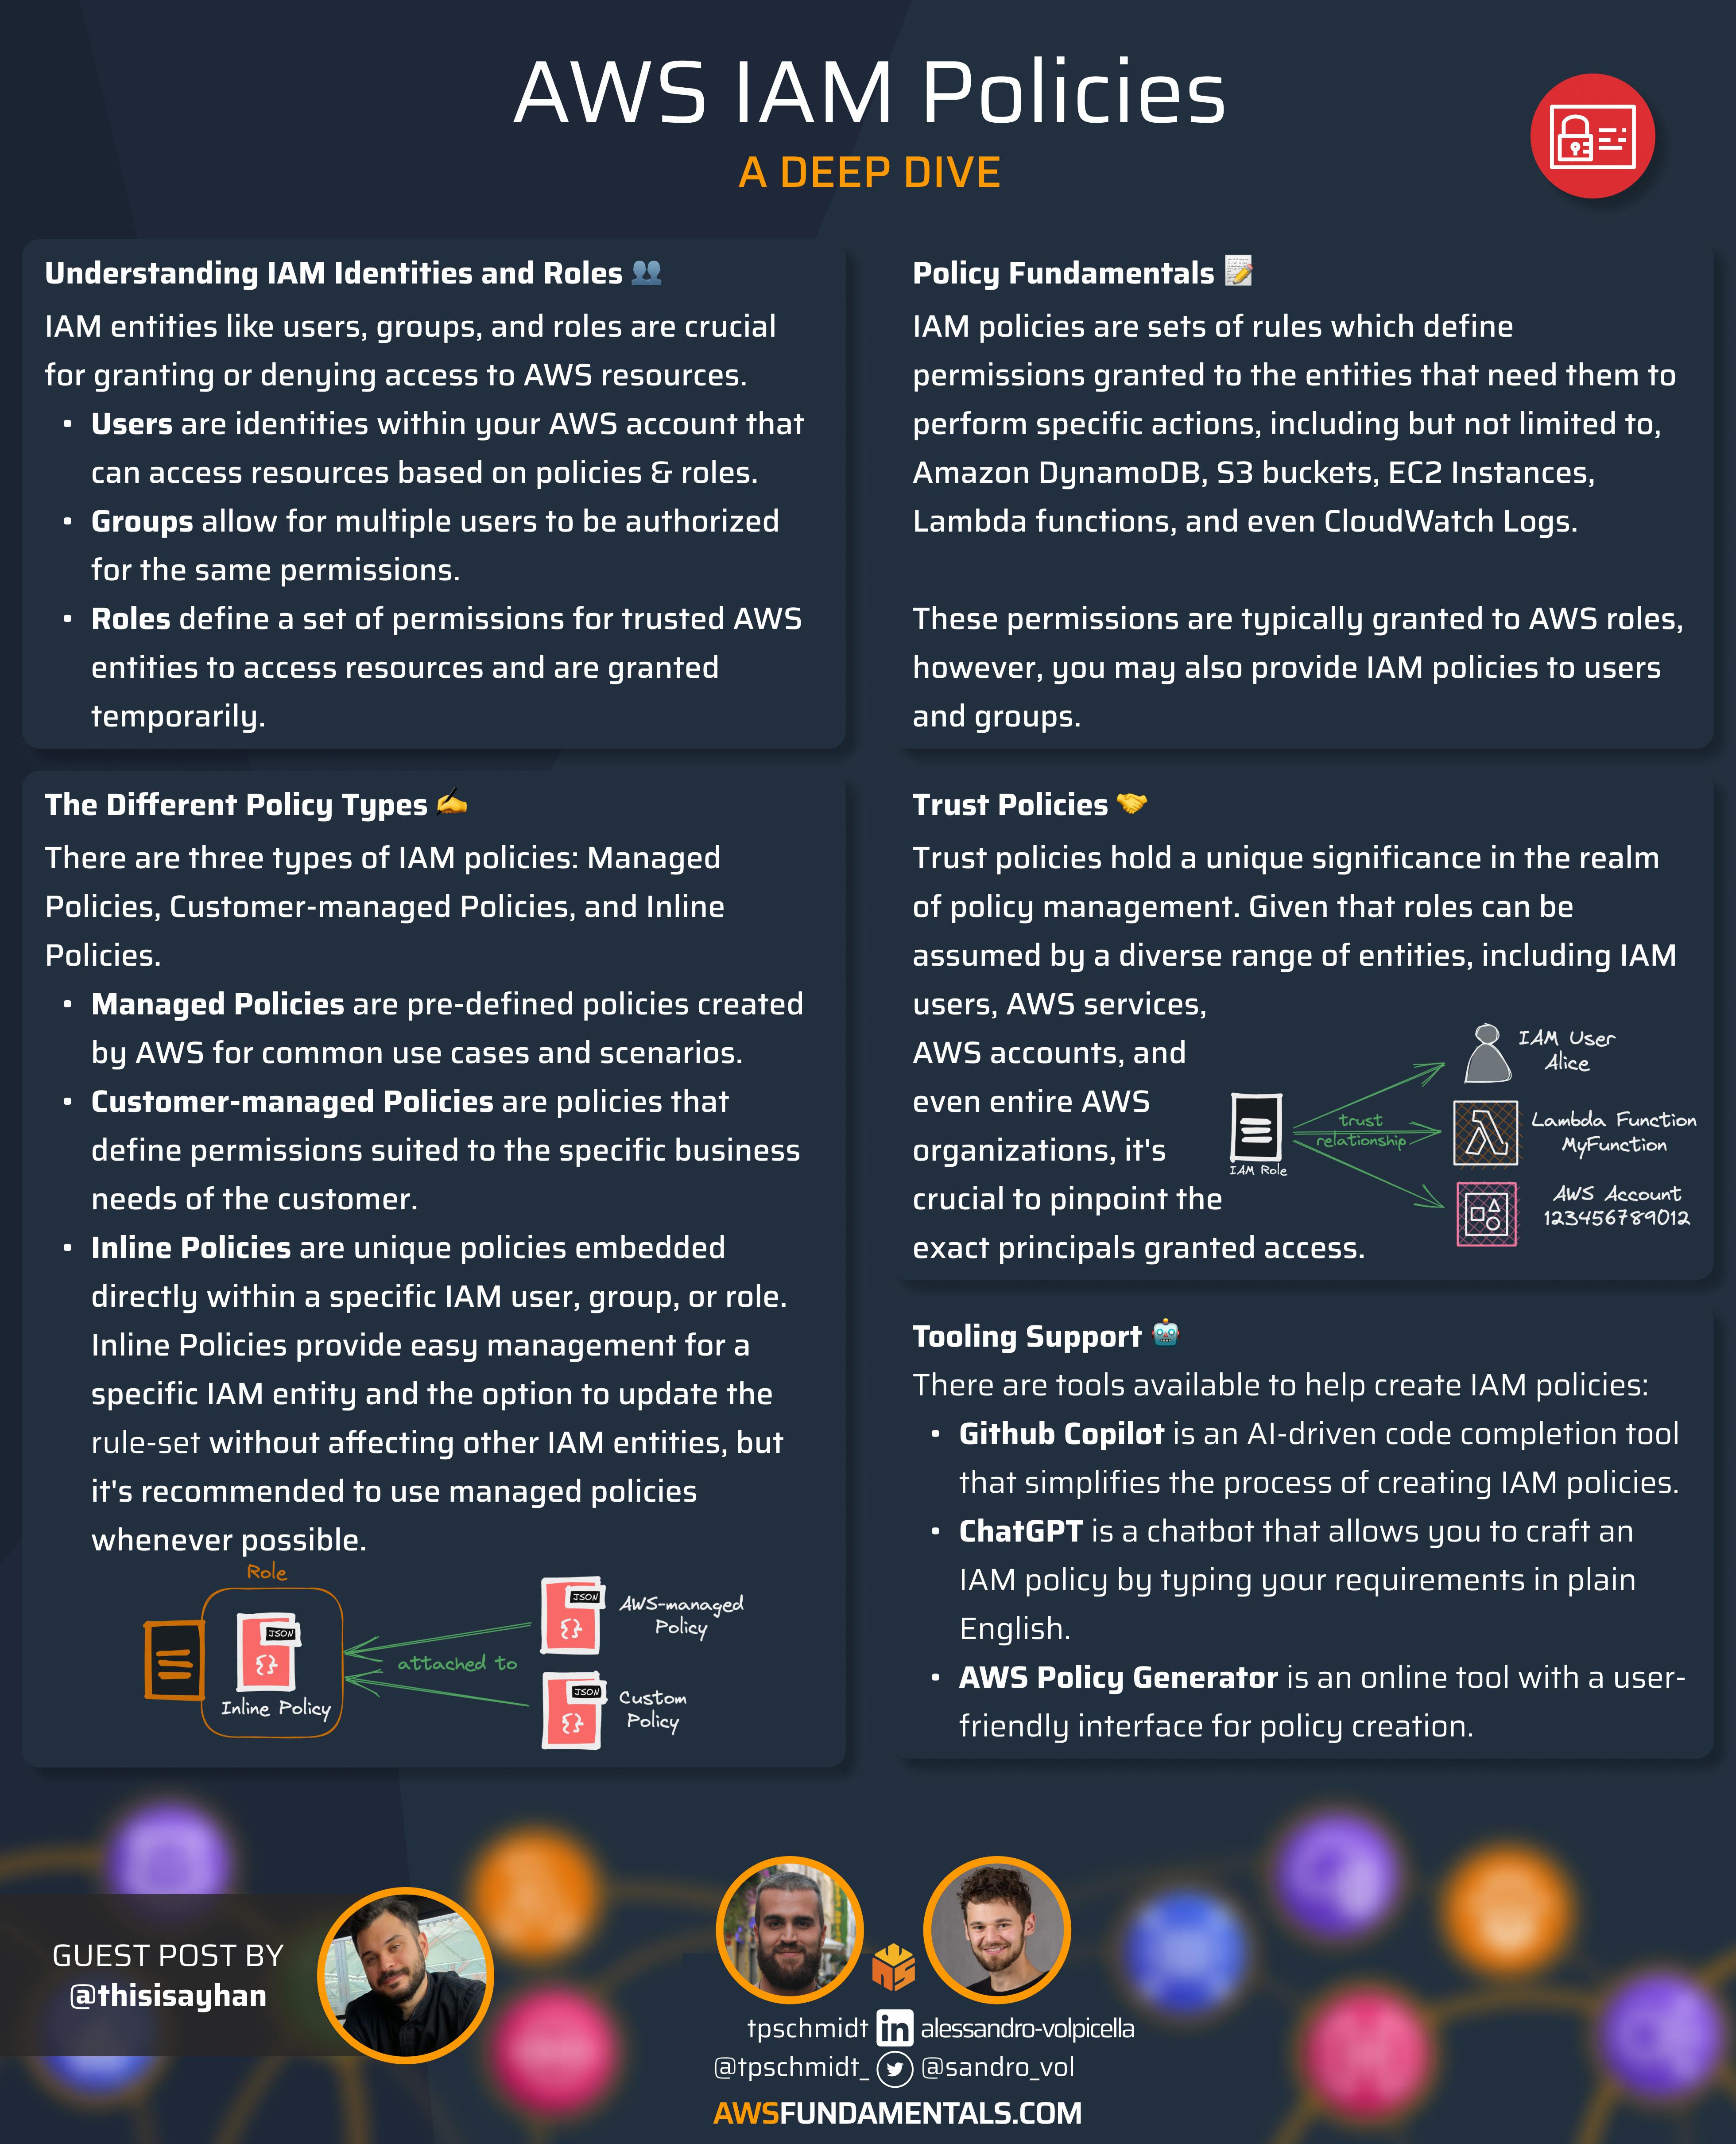 Infographic about AWS IAM policies